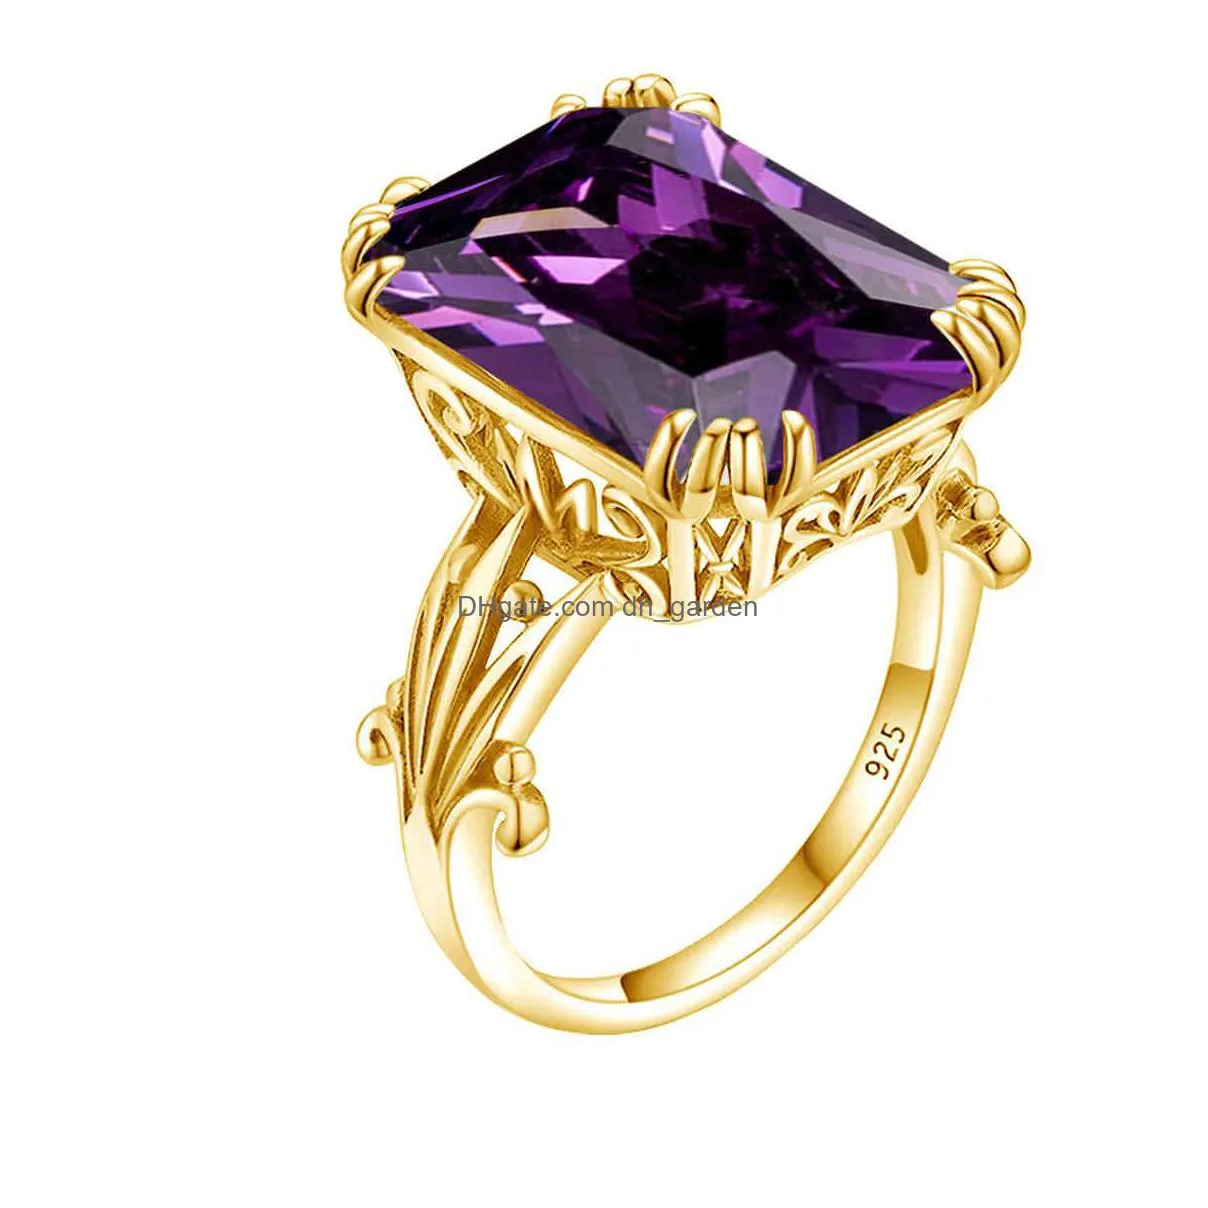 simulated natural amethyst ring for women gemstones 14k gold shiny wedding rings real 925 sterling silver fine jewelry